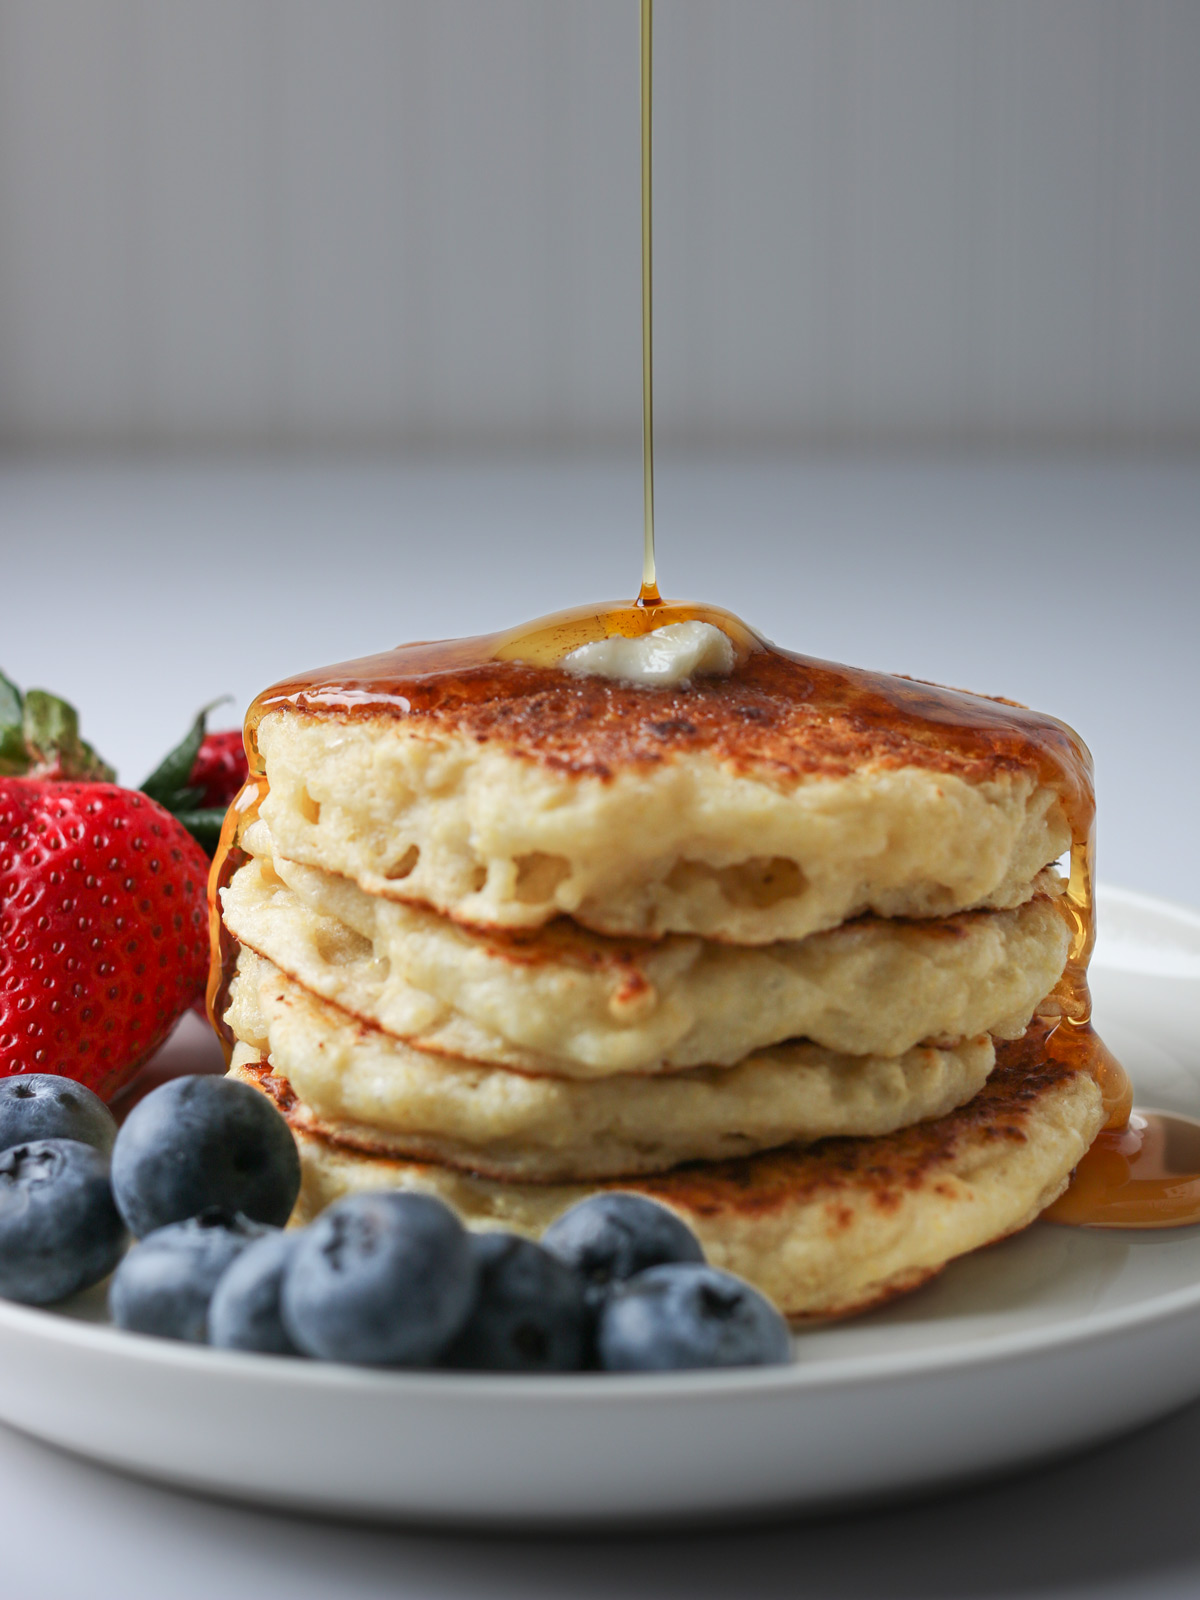 maple syrup drizzling over stack of pancakes with fresh berries on the plate.